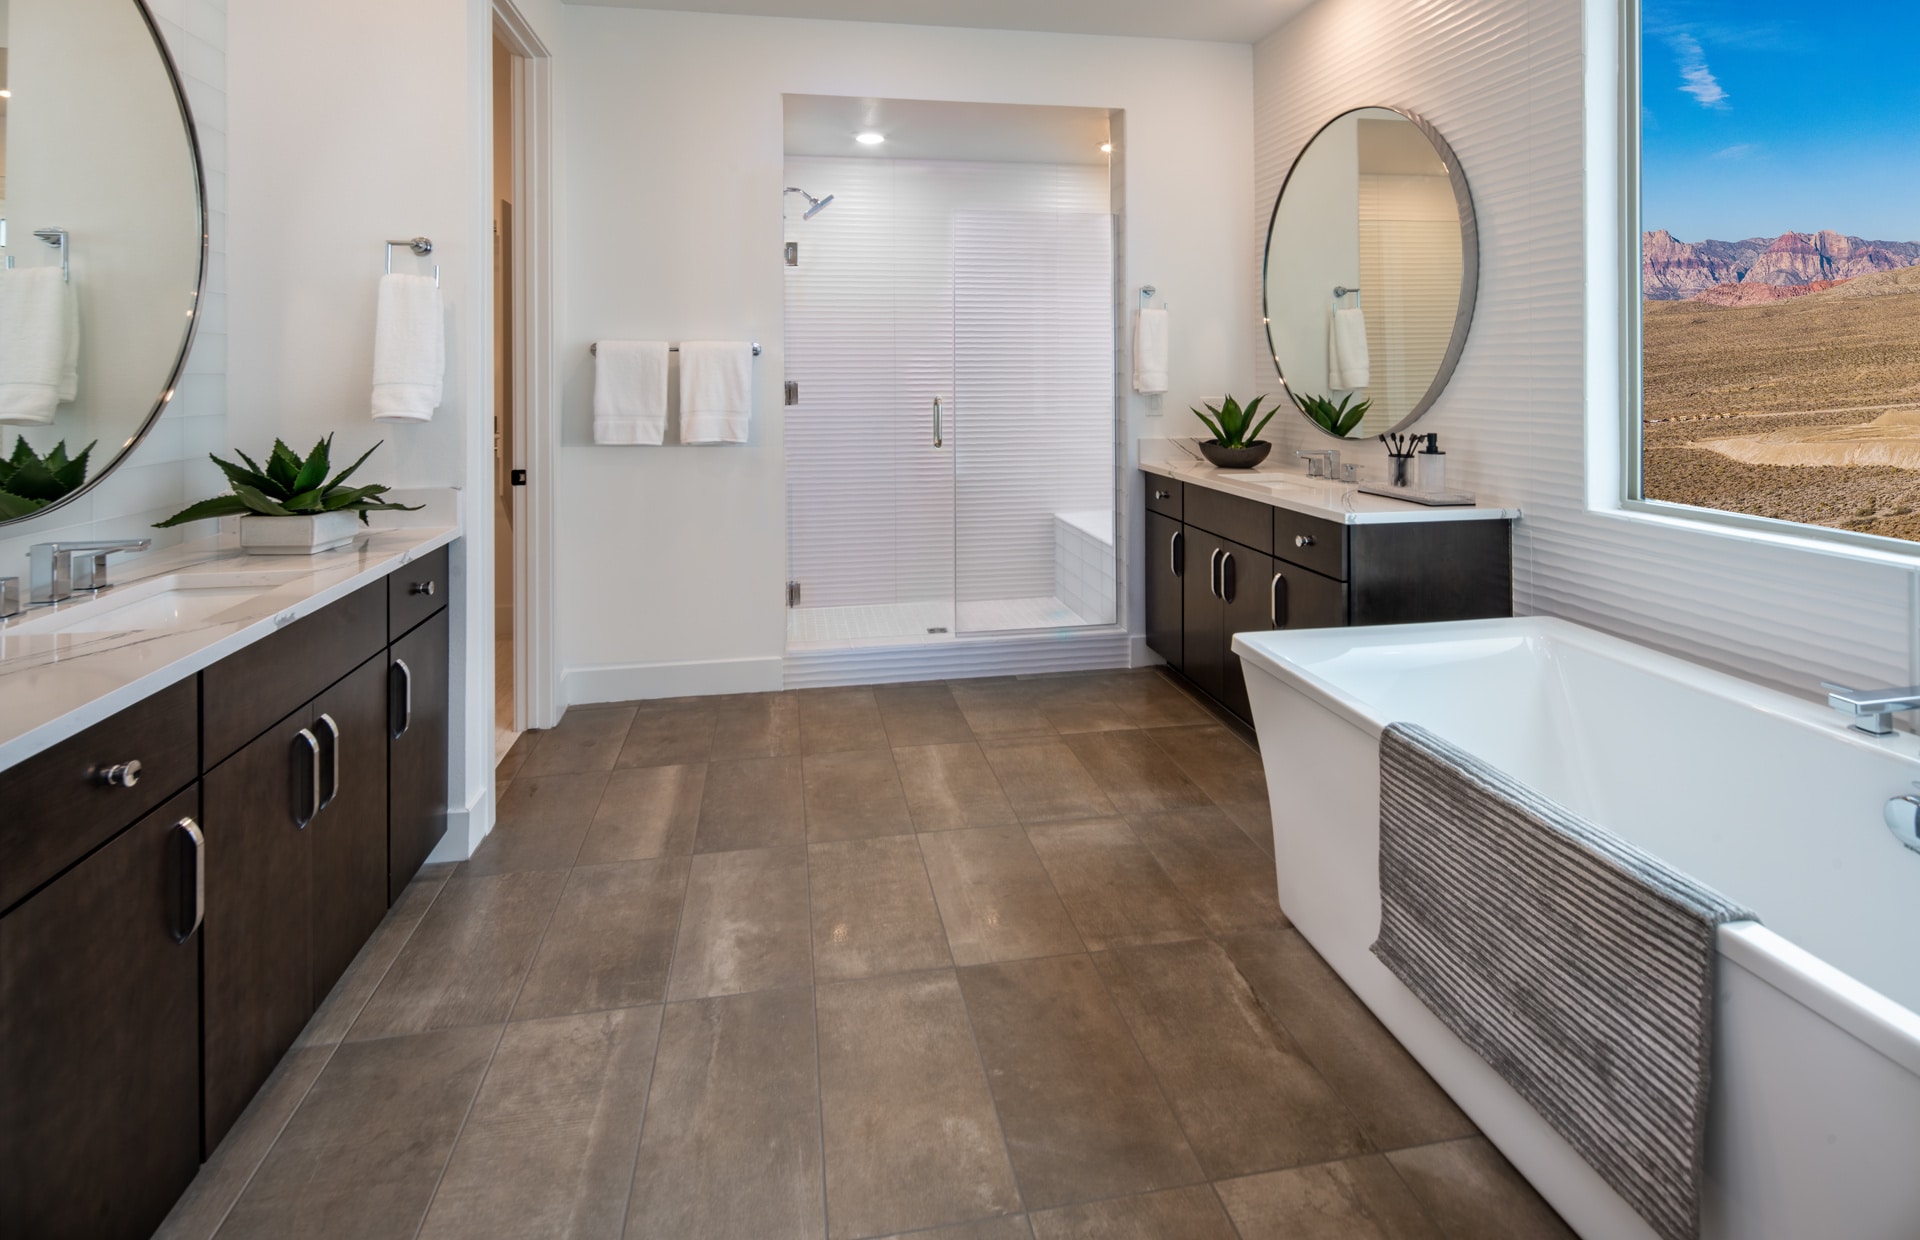 Primary Bathroom of Pesaro Model at Carmel Cliff by Pulte Homes